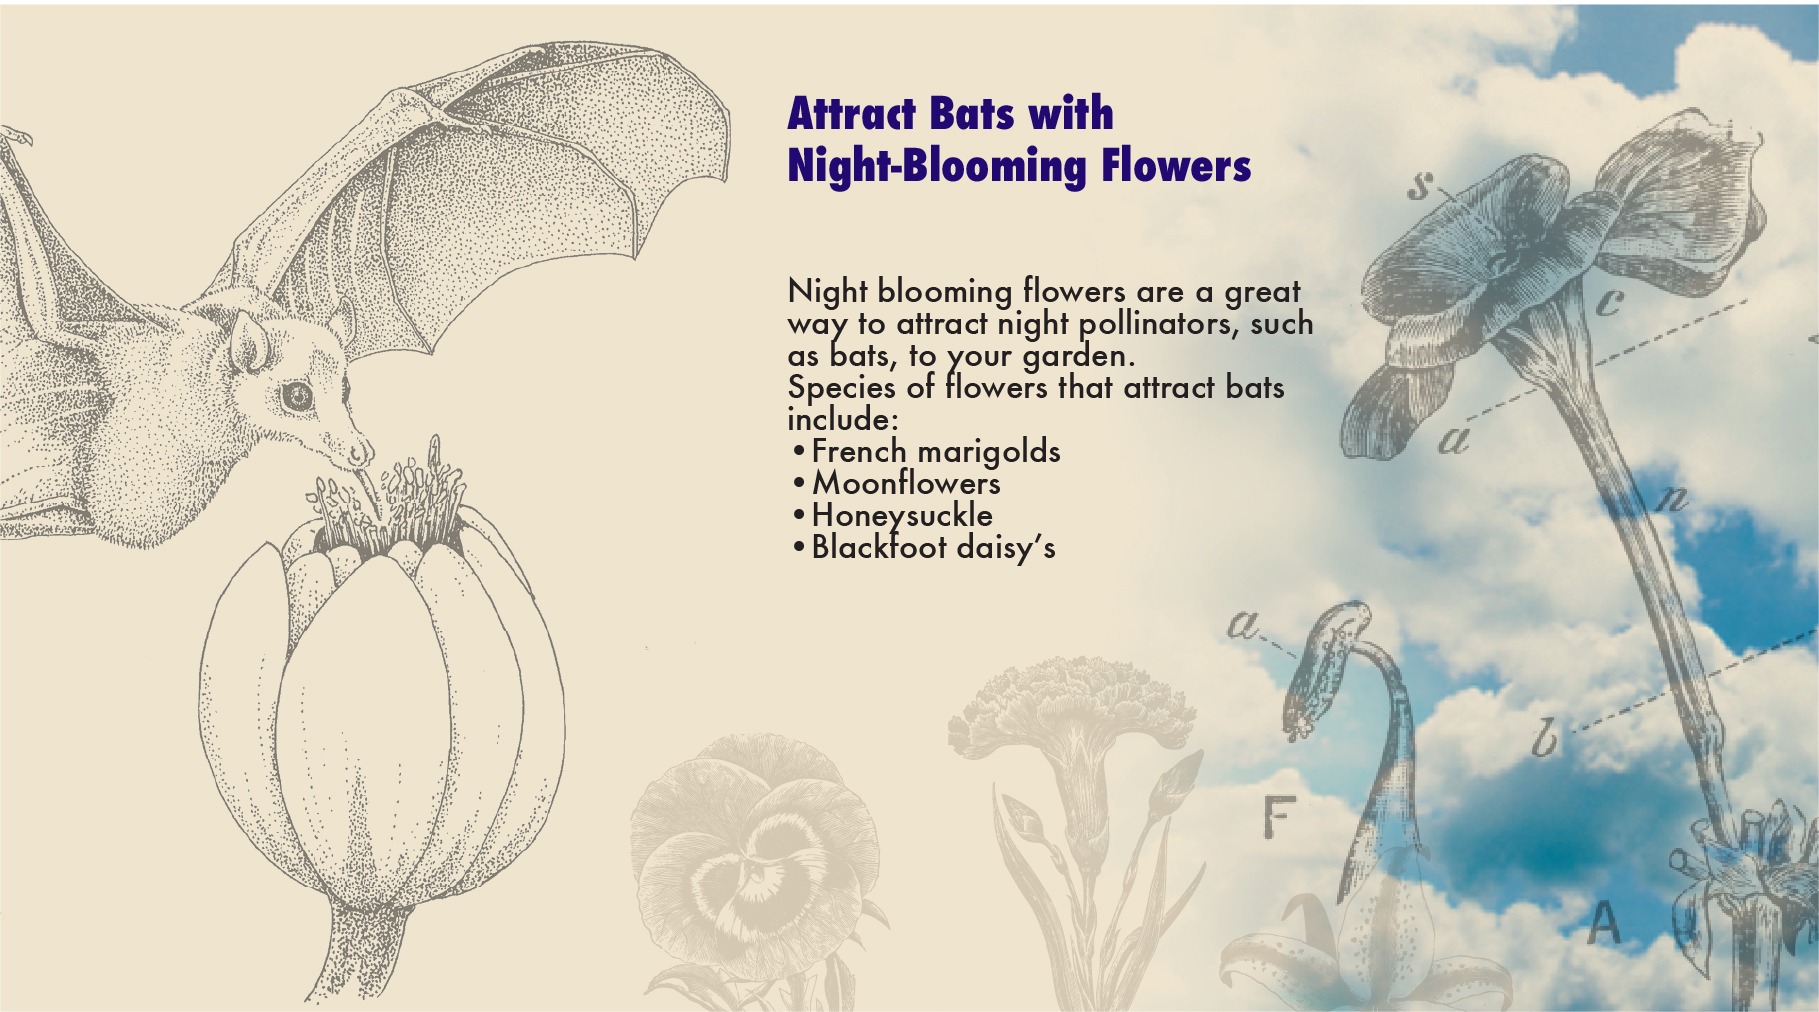 Graphic illustration of bat and night-blooming flowers